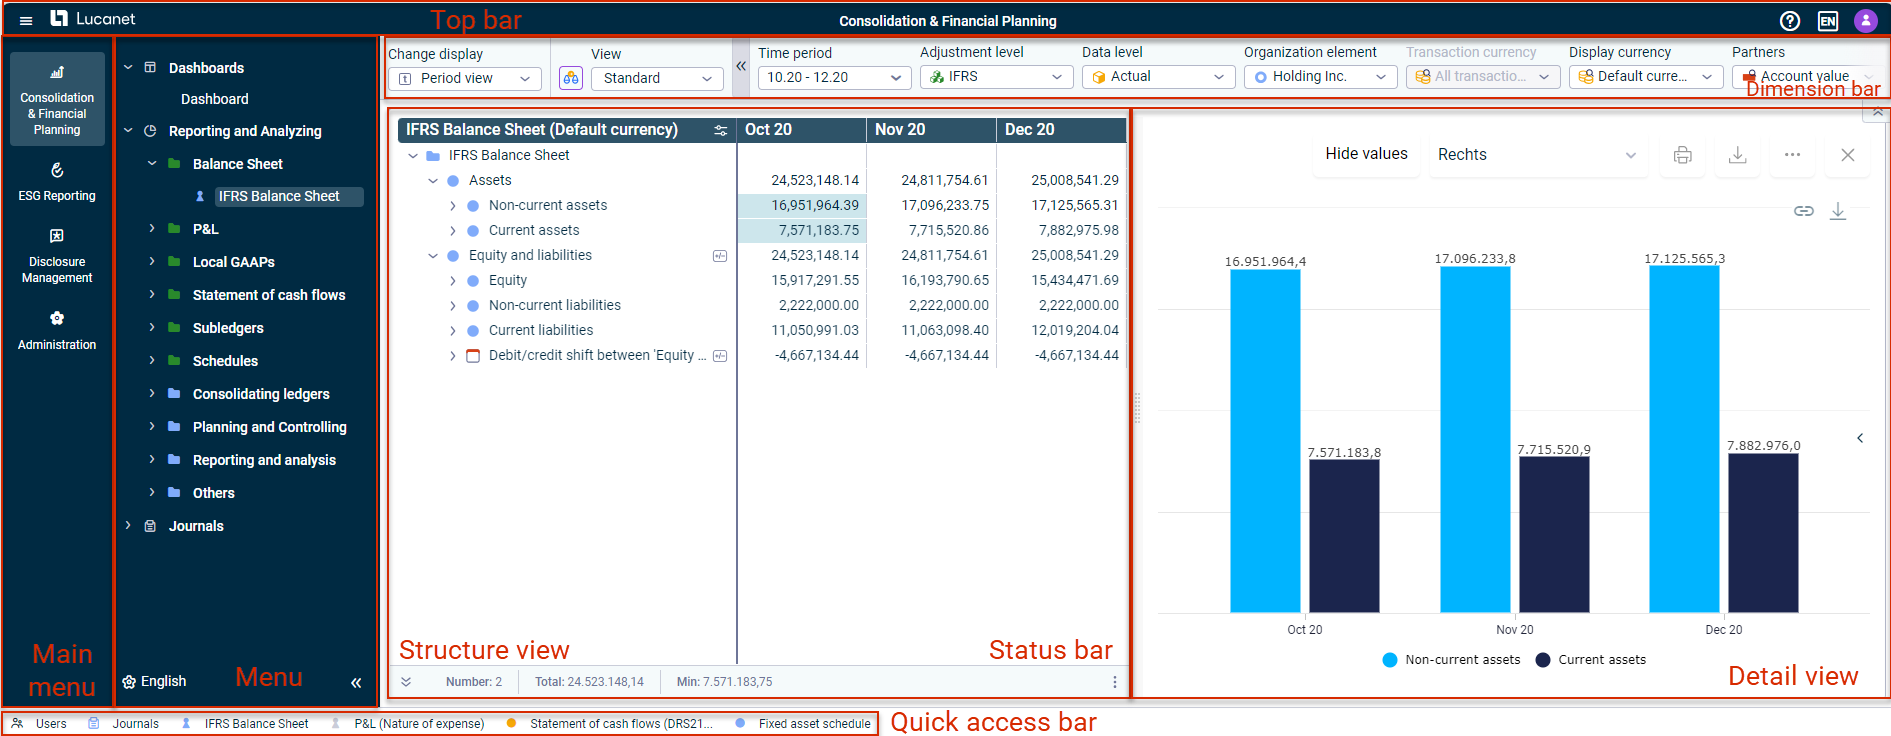 The user interface of the main ledger under Reporting and Analyzing is displayed, the individual user interface elements are marked in red.